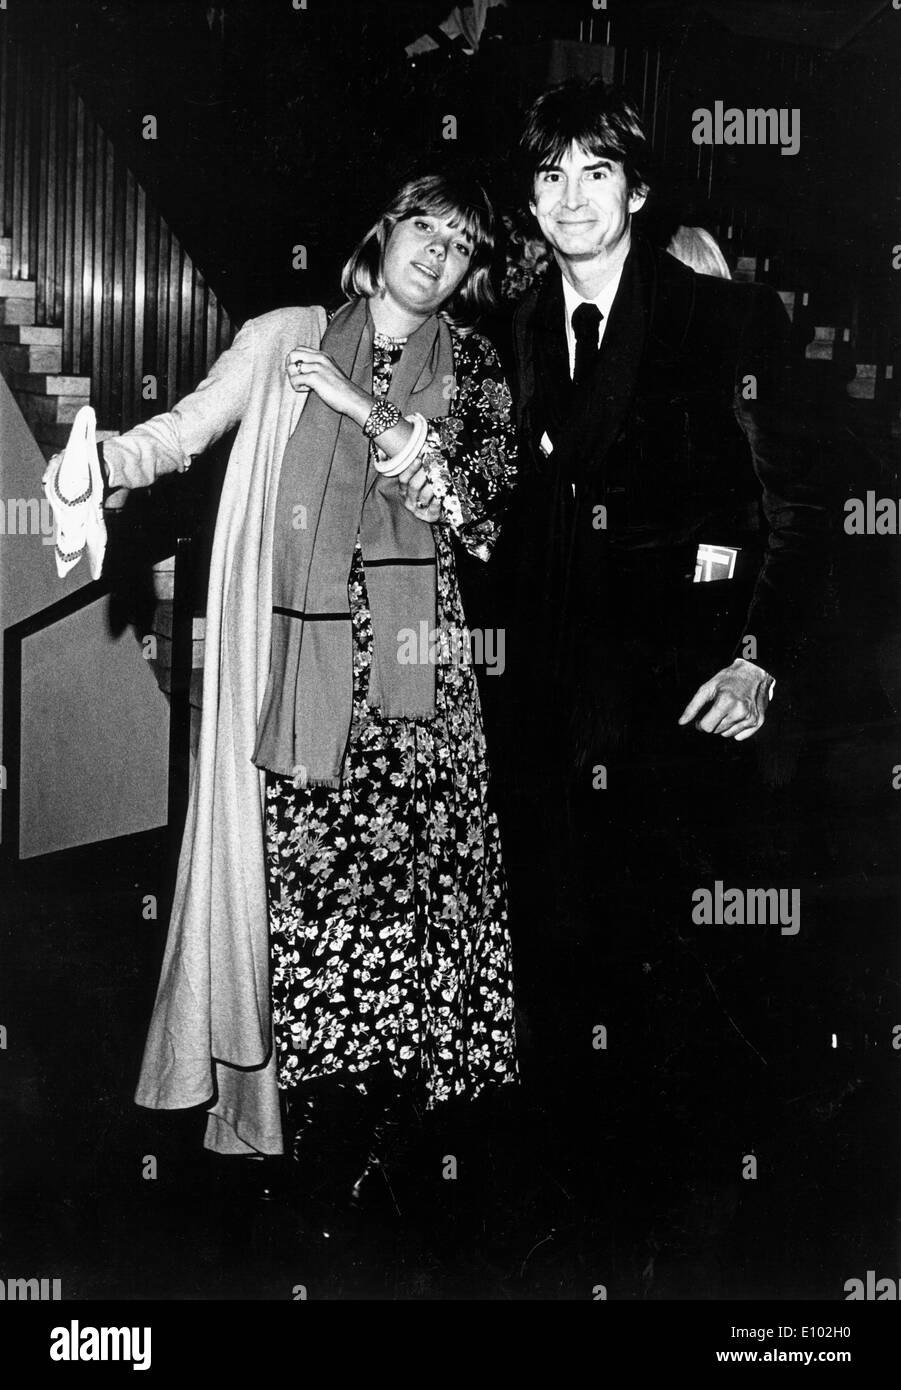 Anthony Perkins and Berry Berenson see band Stock Photo